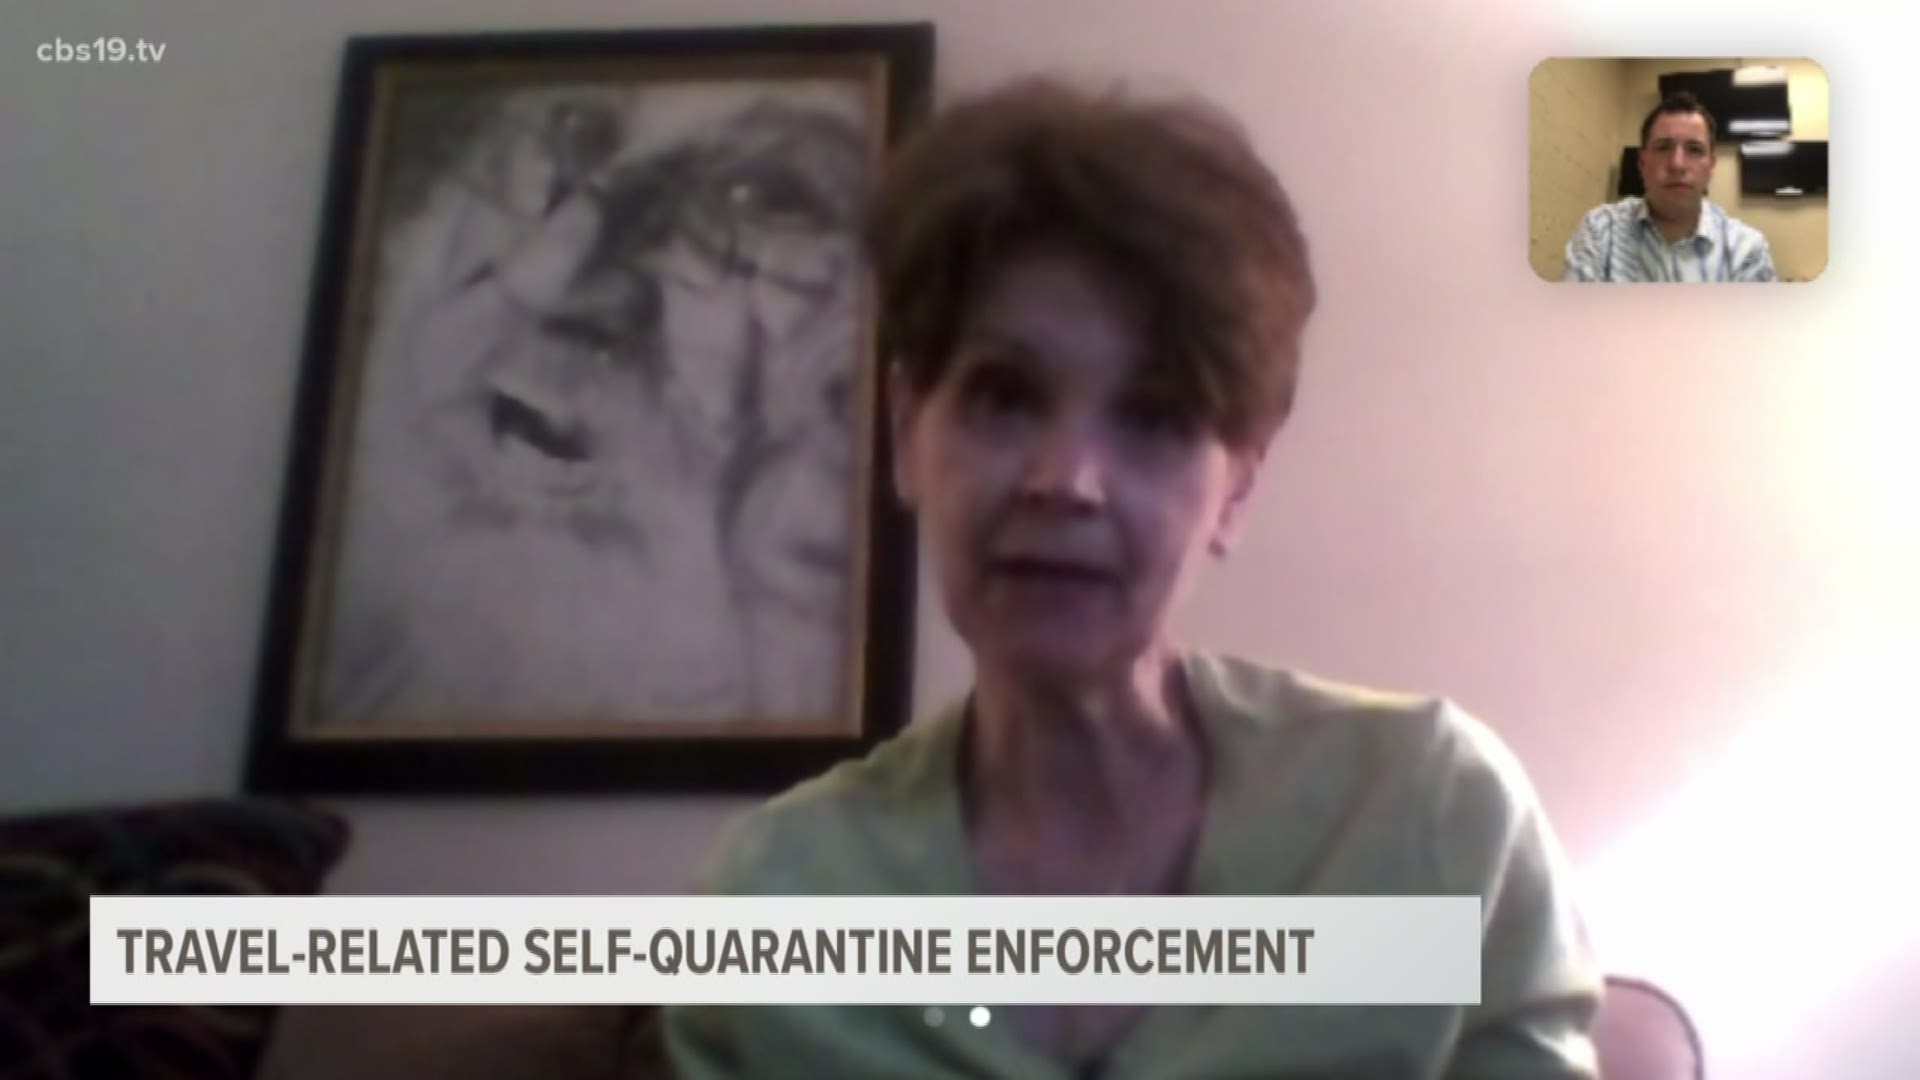 Roxanne Clow said a trooper's visit to her house to ensure she was self-quarantined was a surprise, but not unexpected.